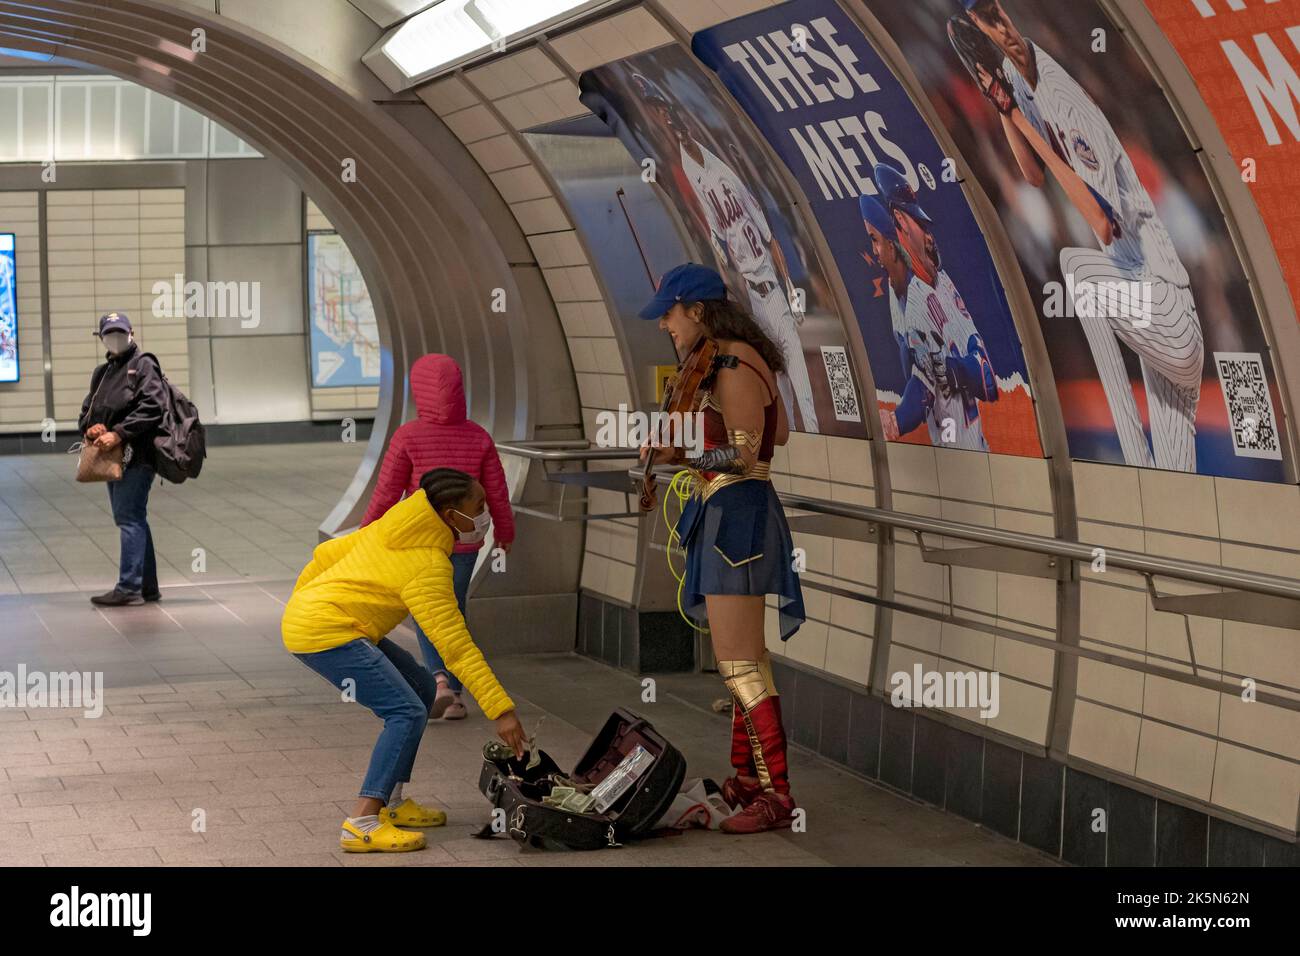 NEW YORK, NEW YORK - OCTOBER 08: A woman dressed as Wonder Woman plays violin during New York Comic Con 2022 at the Hudson Yards subway station on October 08, 2022 in New York City. Credit: Ron Adar/Alamy Live News Stock Photo